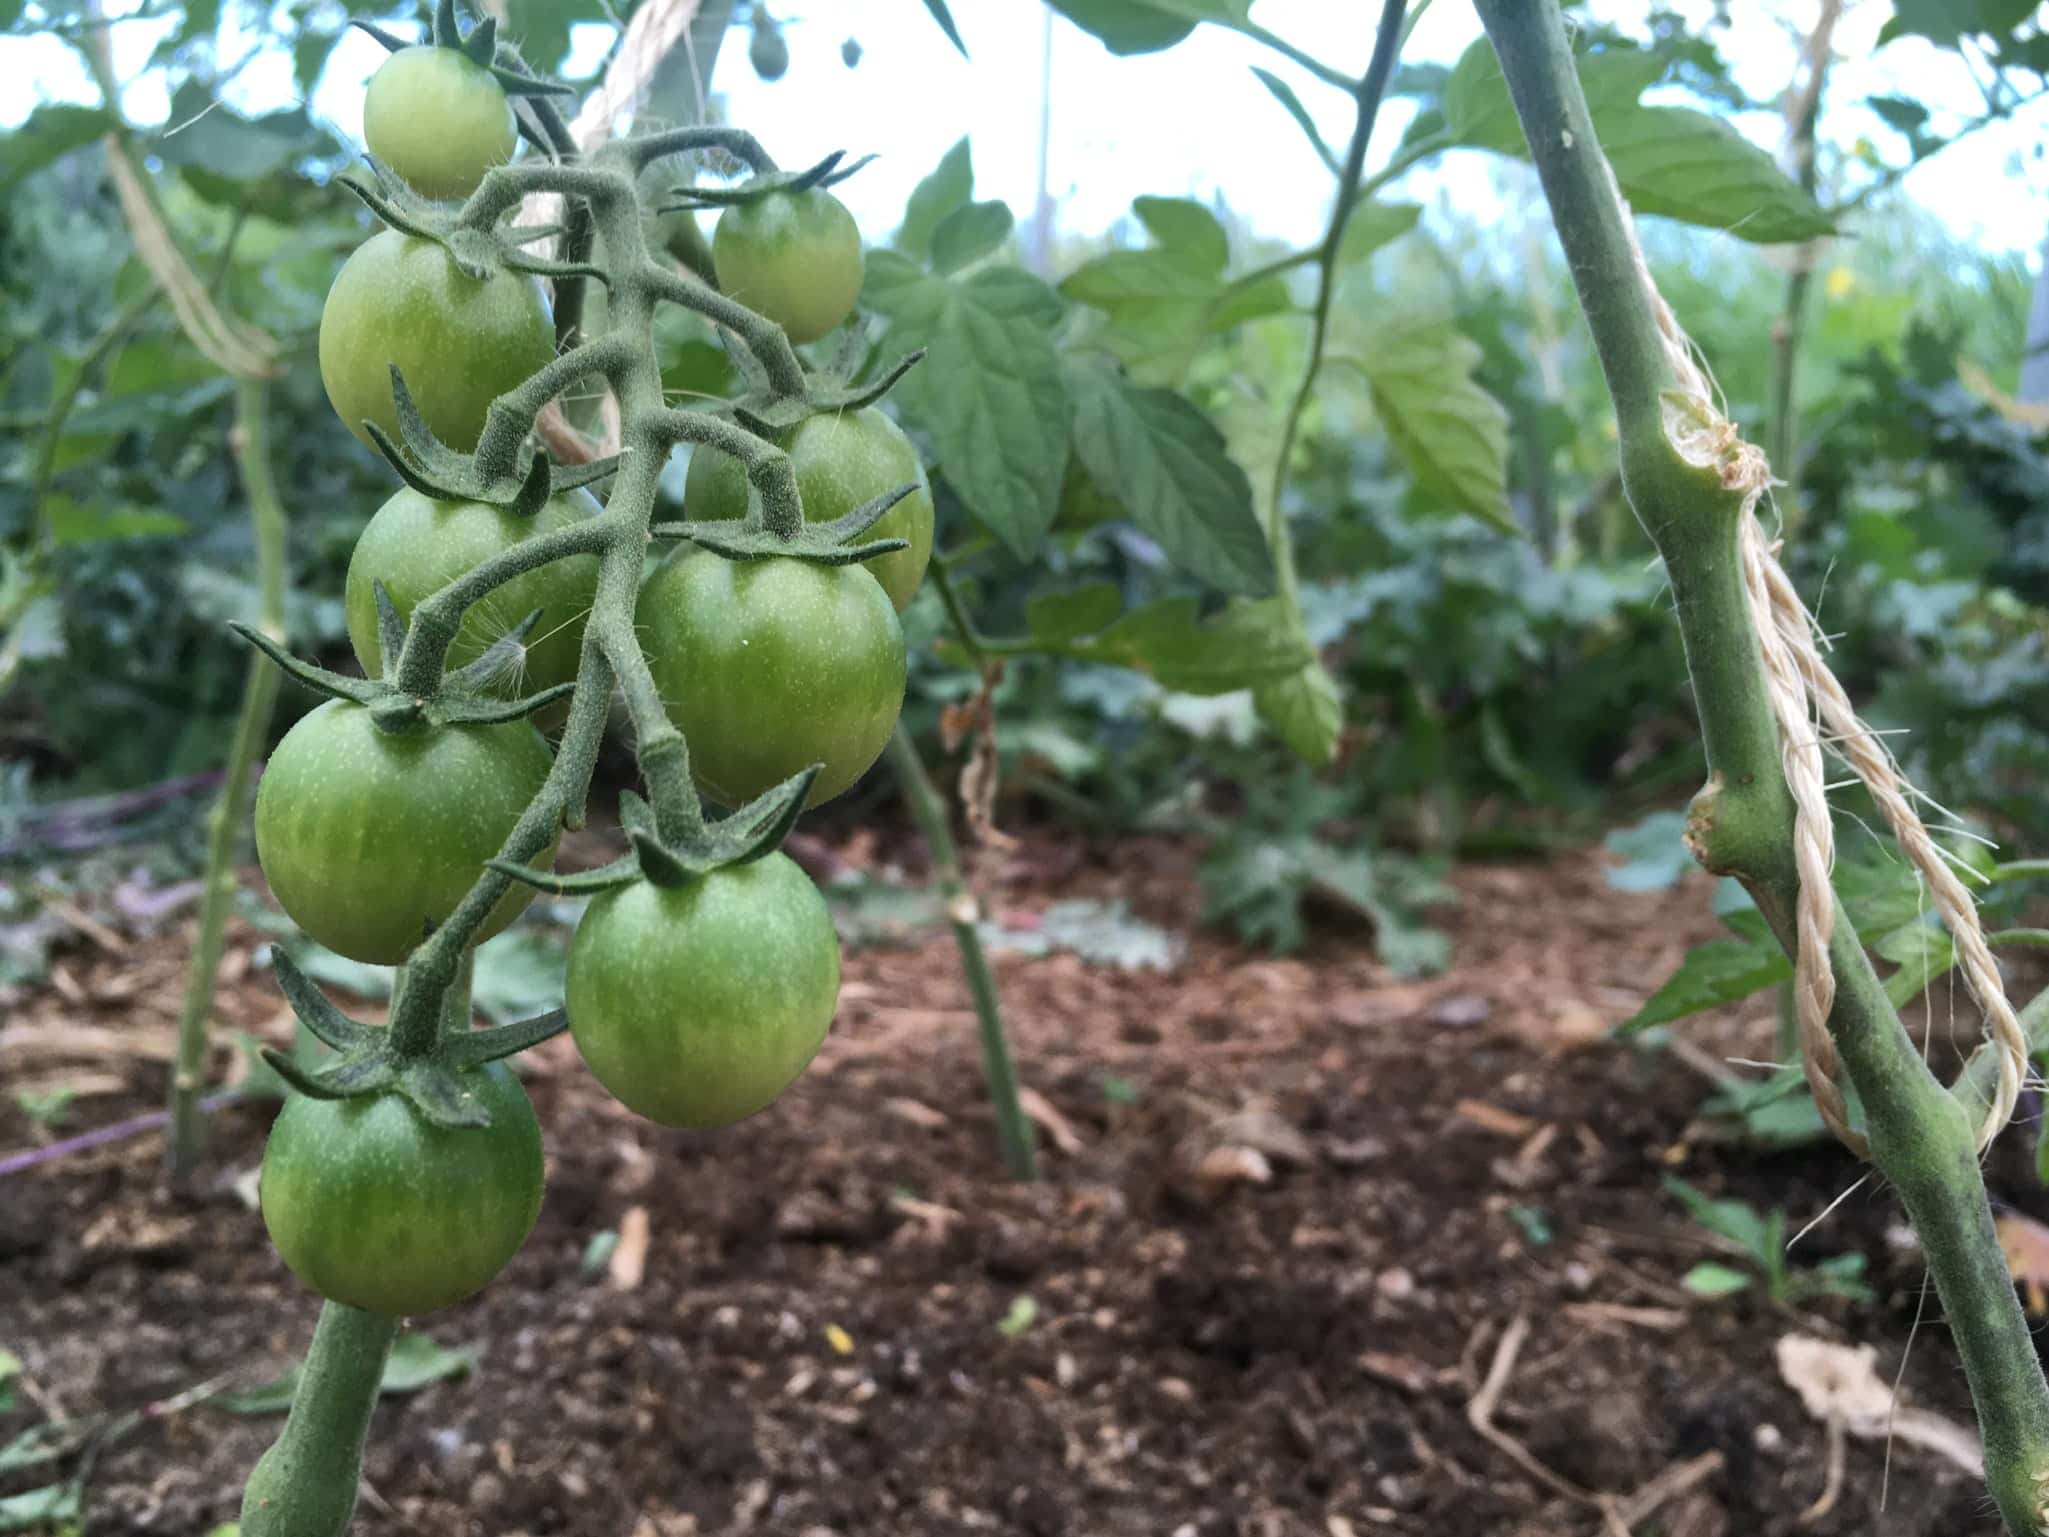 Green tomatoes on the vine - CSA Week 3 and making a trip to Dufferin Grove